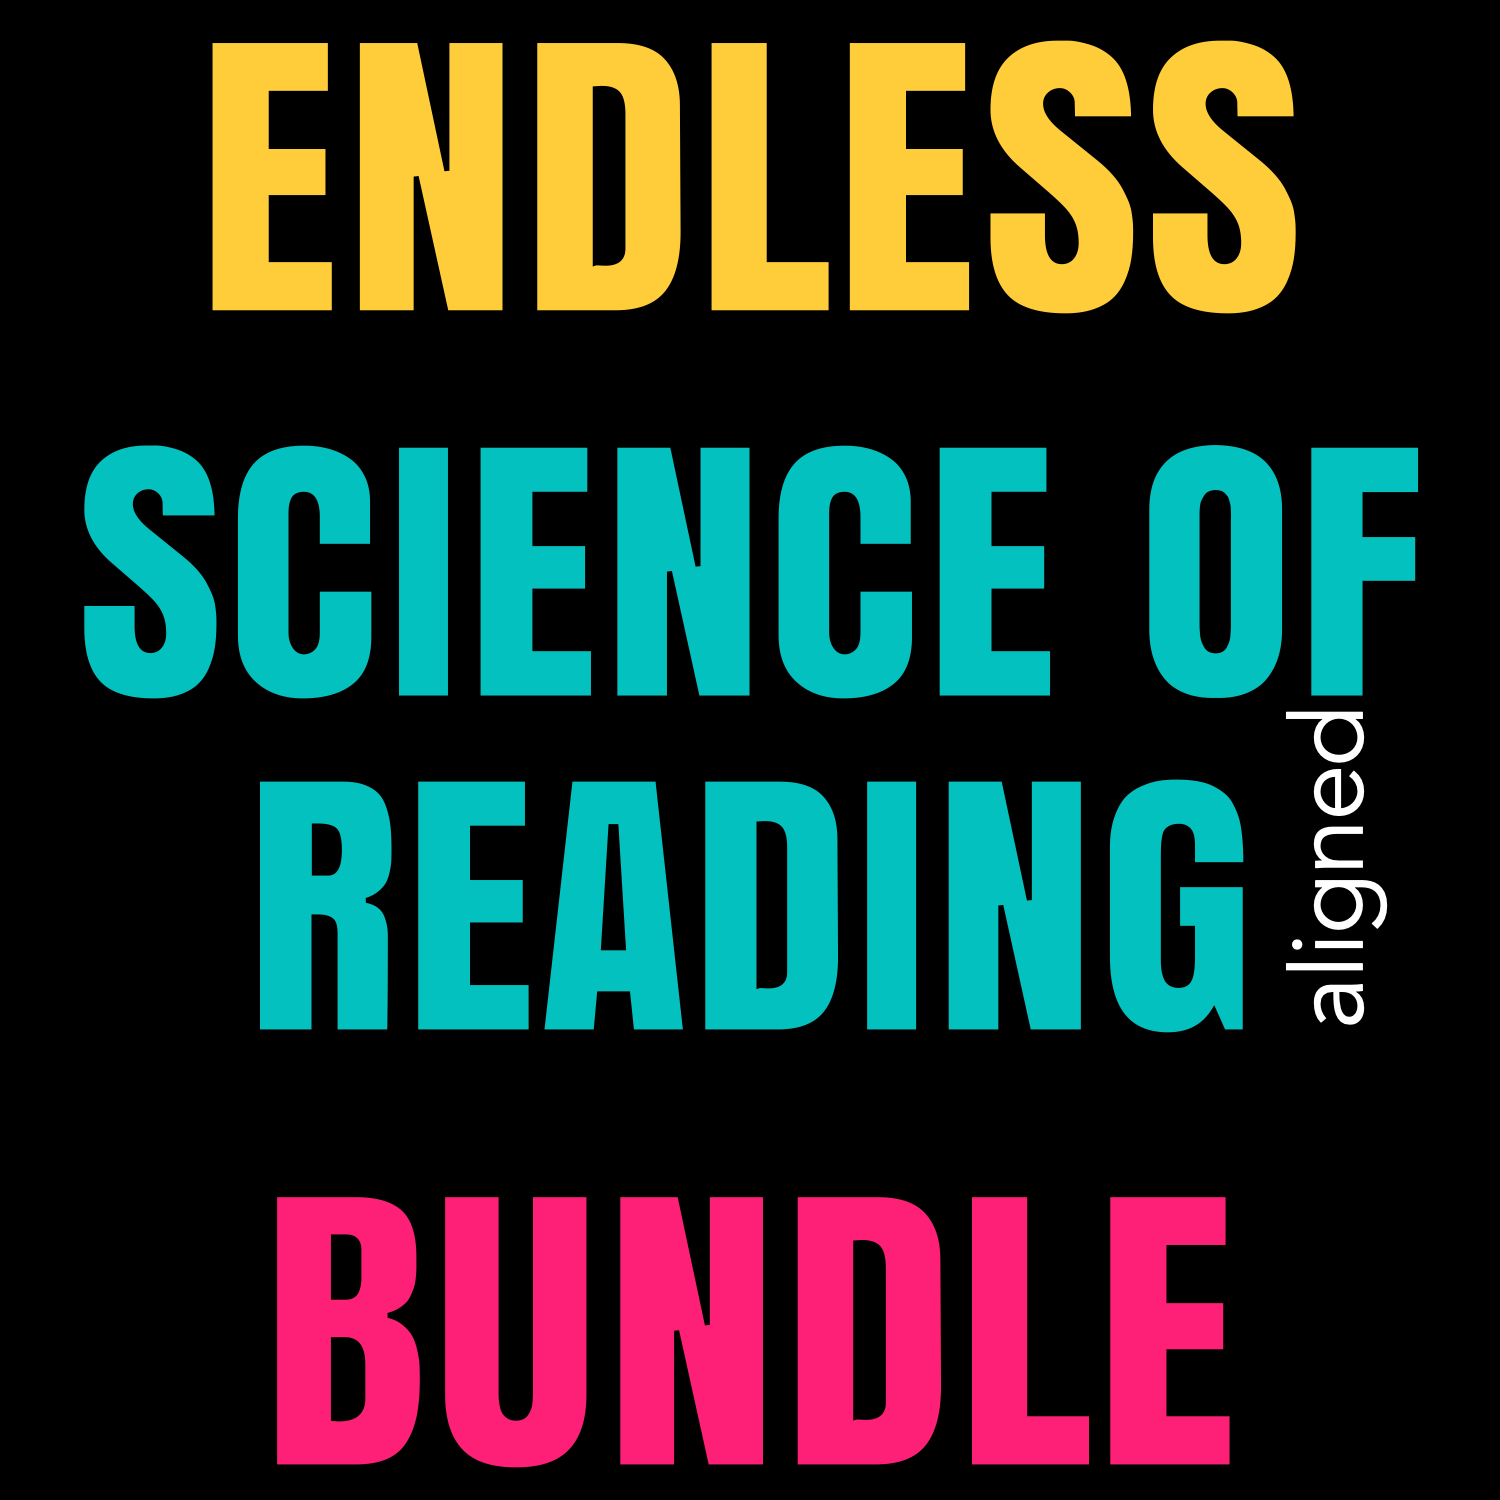 Take advantage of the ENDLESS BUNDLE! It already has tons of literacy centers aligned with the Science of Reading: letter names and sounds practice, high-frequency words activities (heart words), CVC words centers, and a sound wall. Buy it now and get future sets for free.